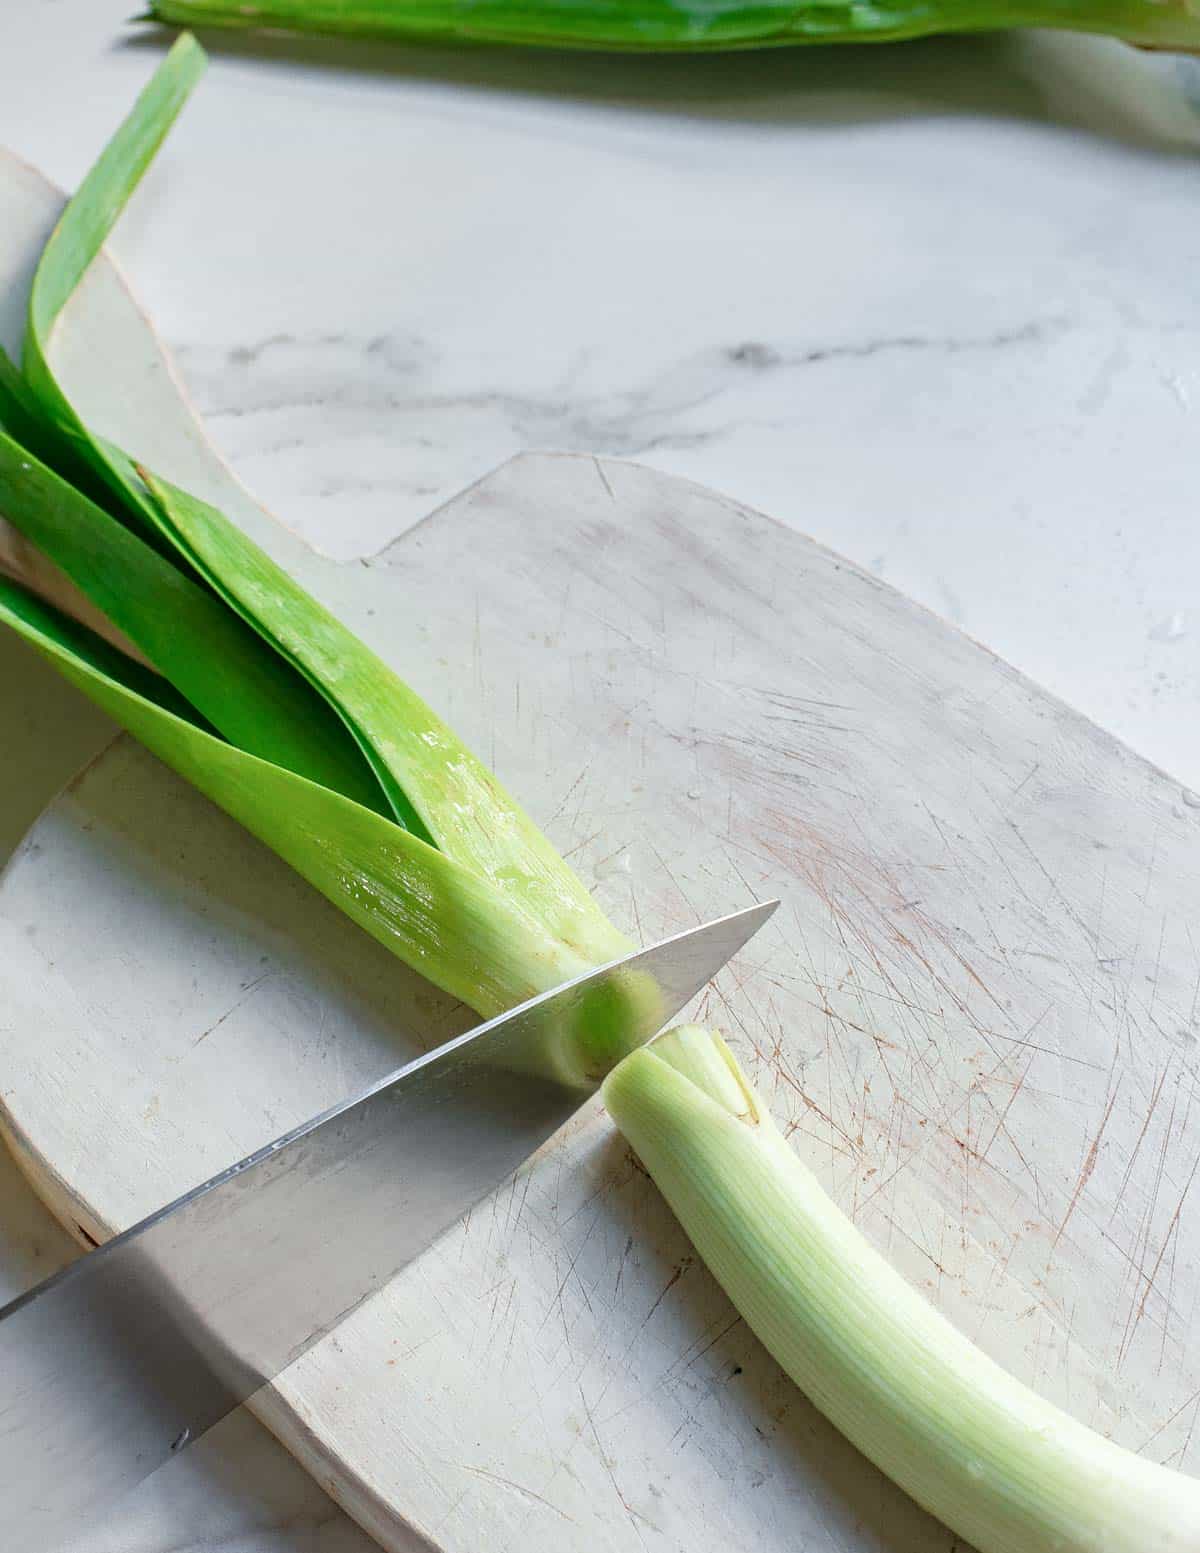 Cutting the white part from the green leaves on leeks.